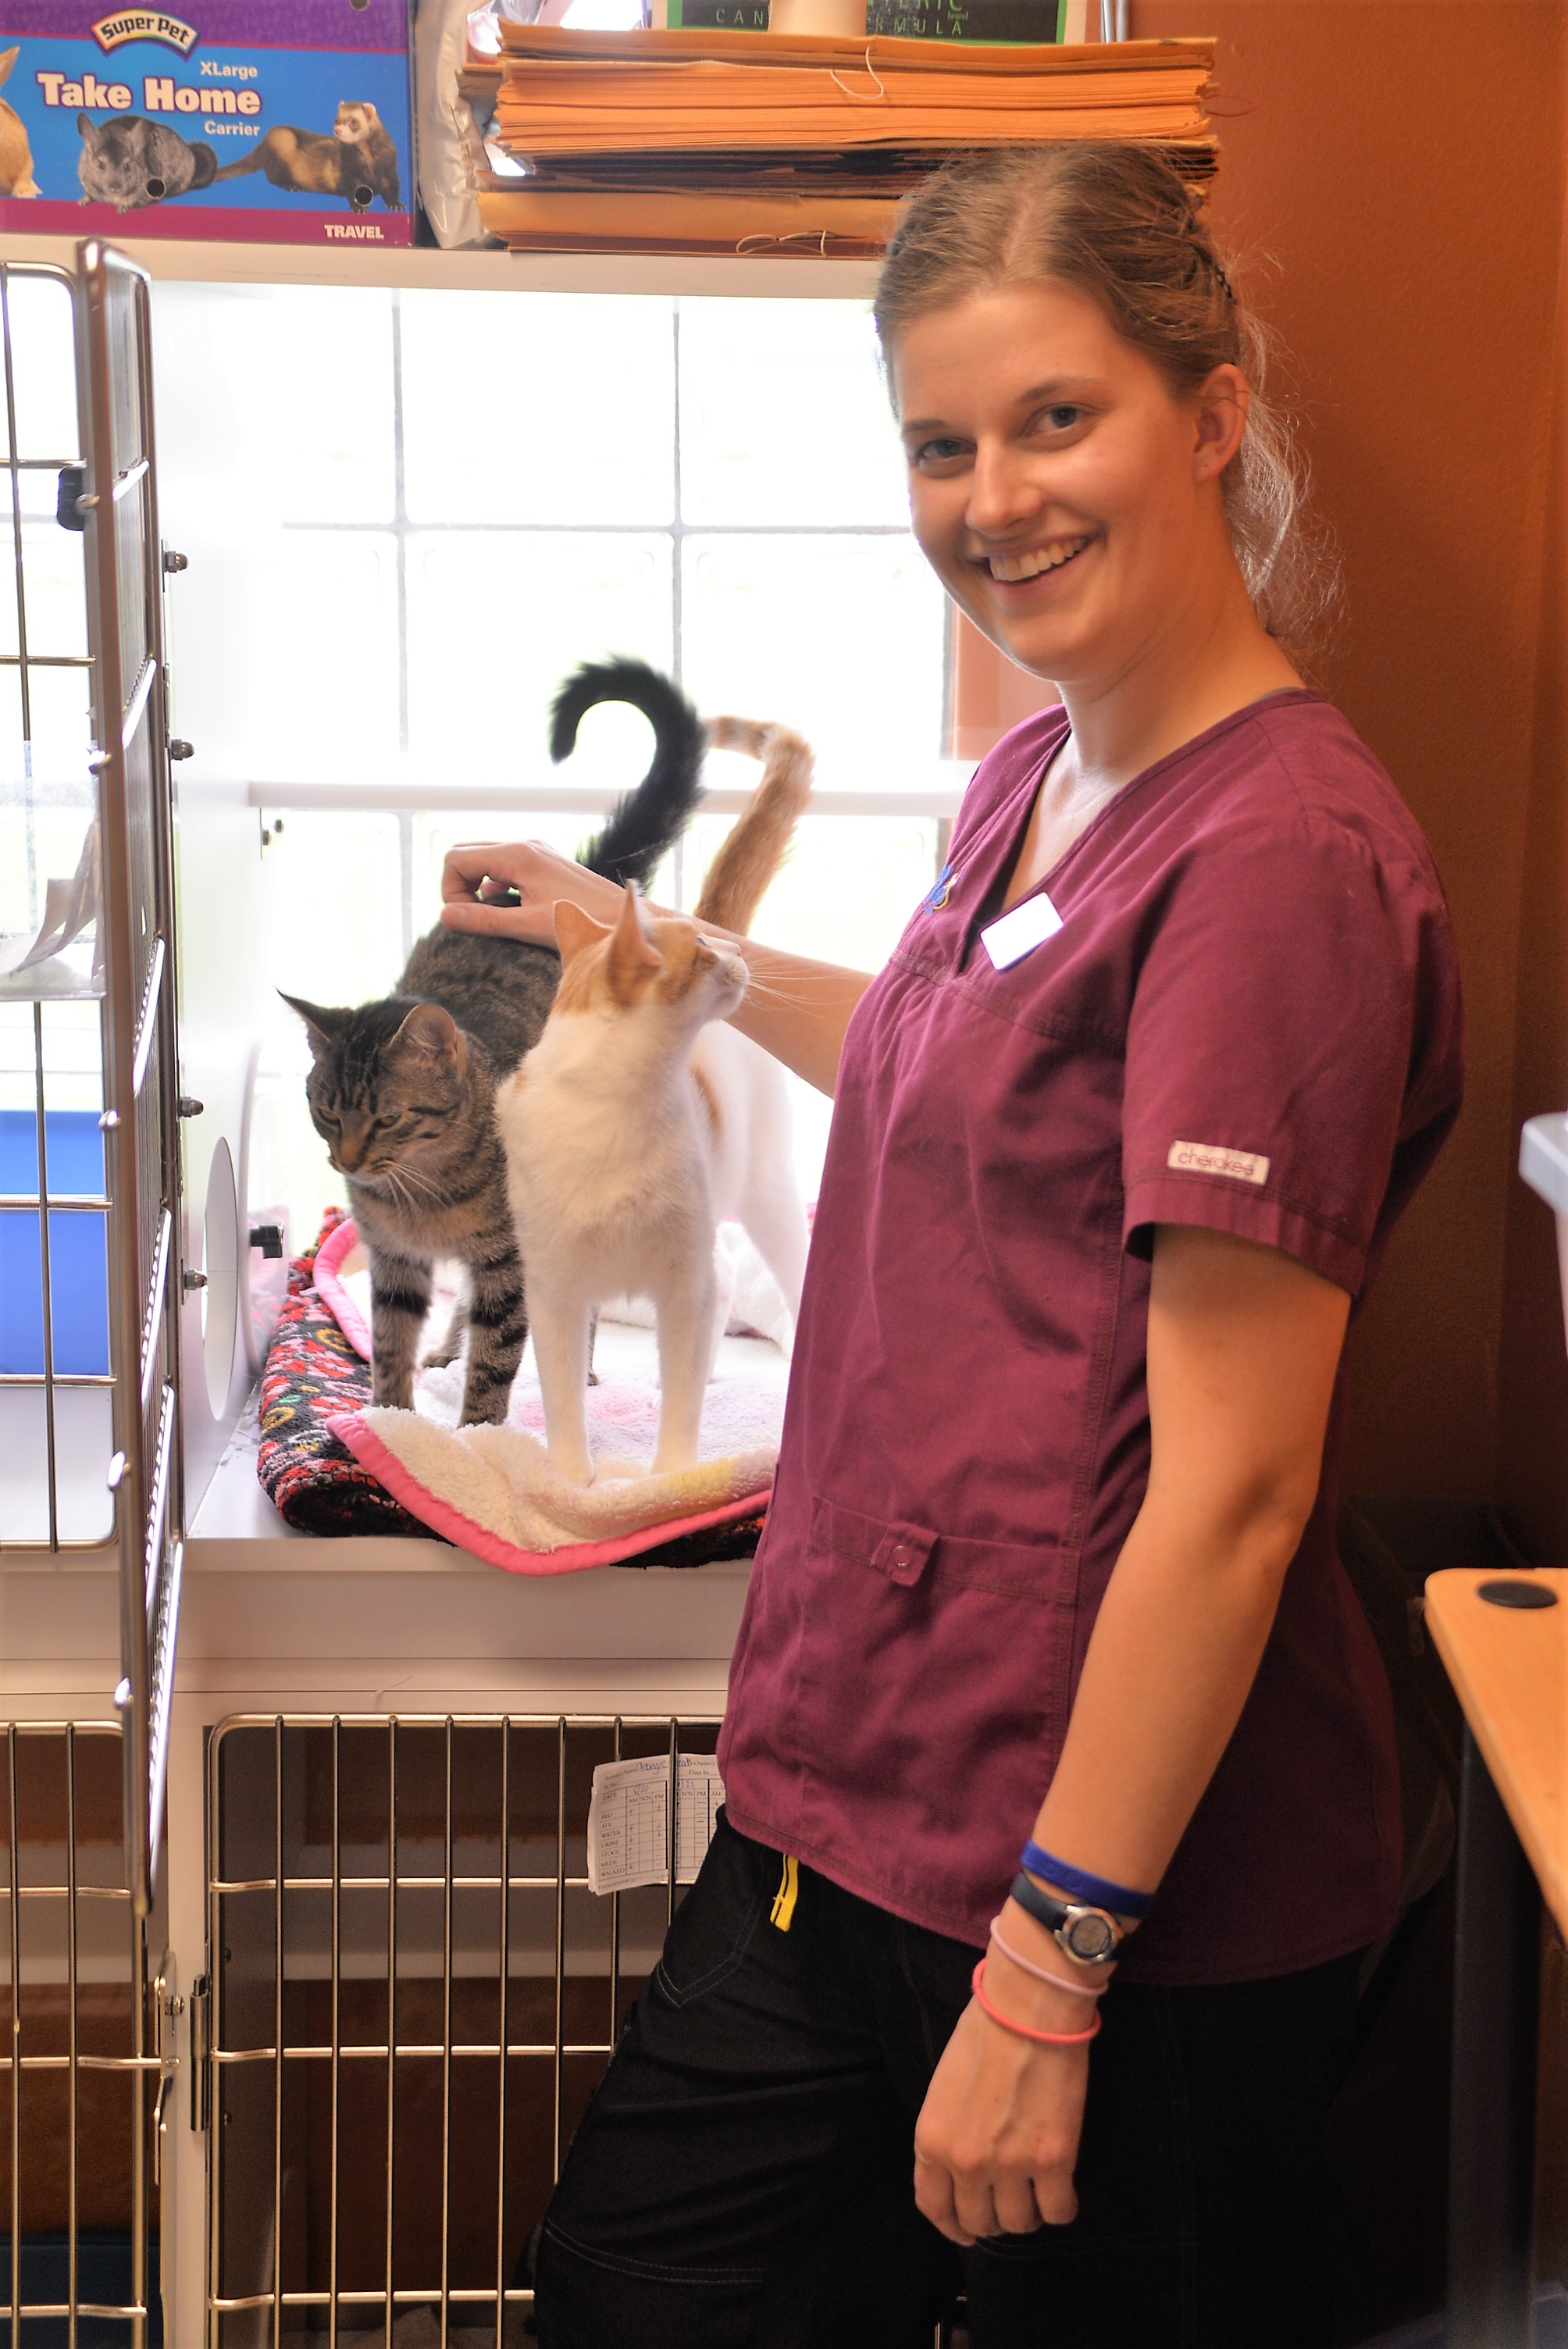 A separate cat ward with natural lighting provides a calm, comfortable, quite environment for cats.